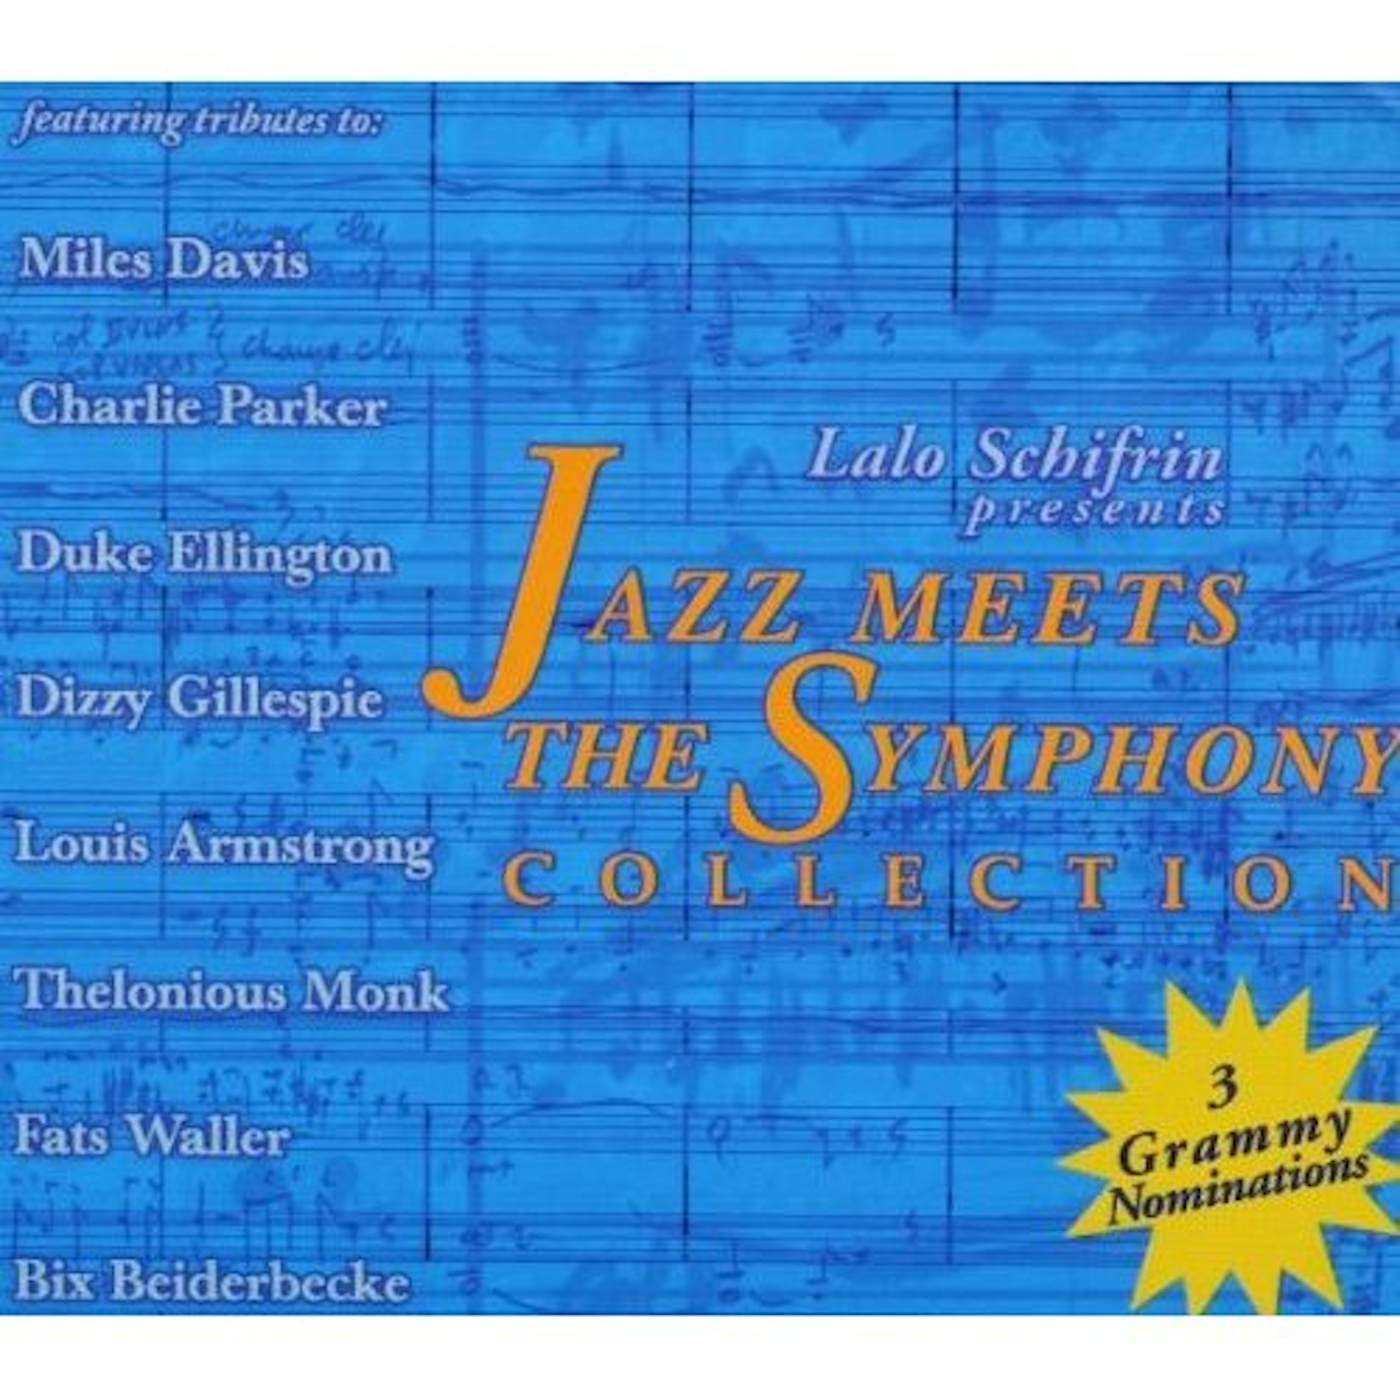 Lalo Schifrin JAZZ MEETS SYMPHONY COLLECTION CD